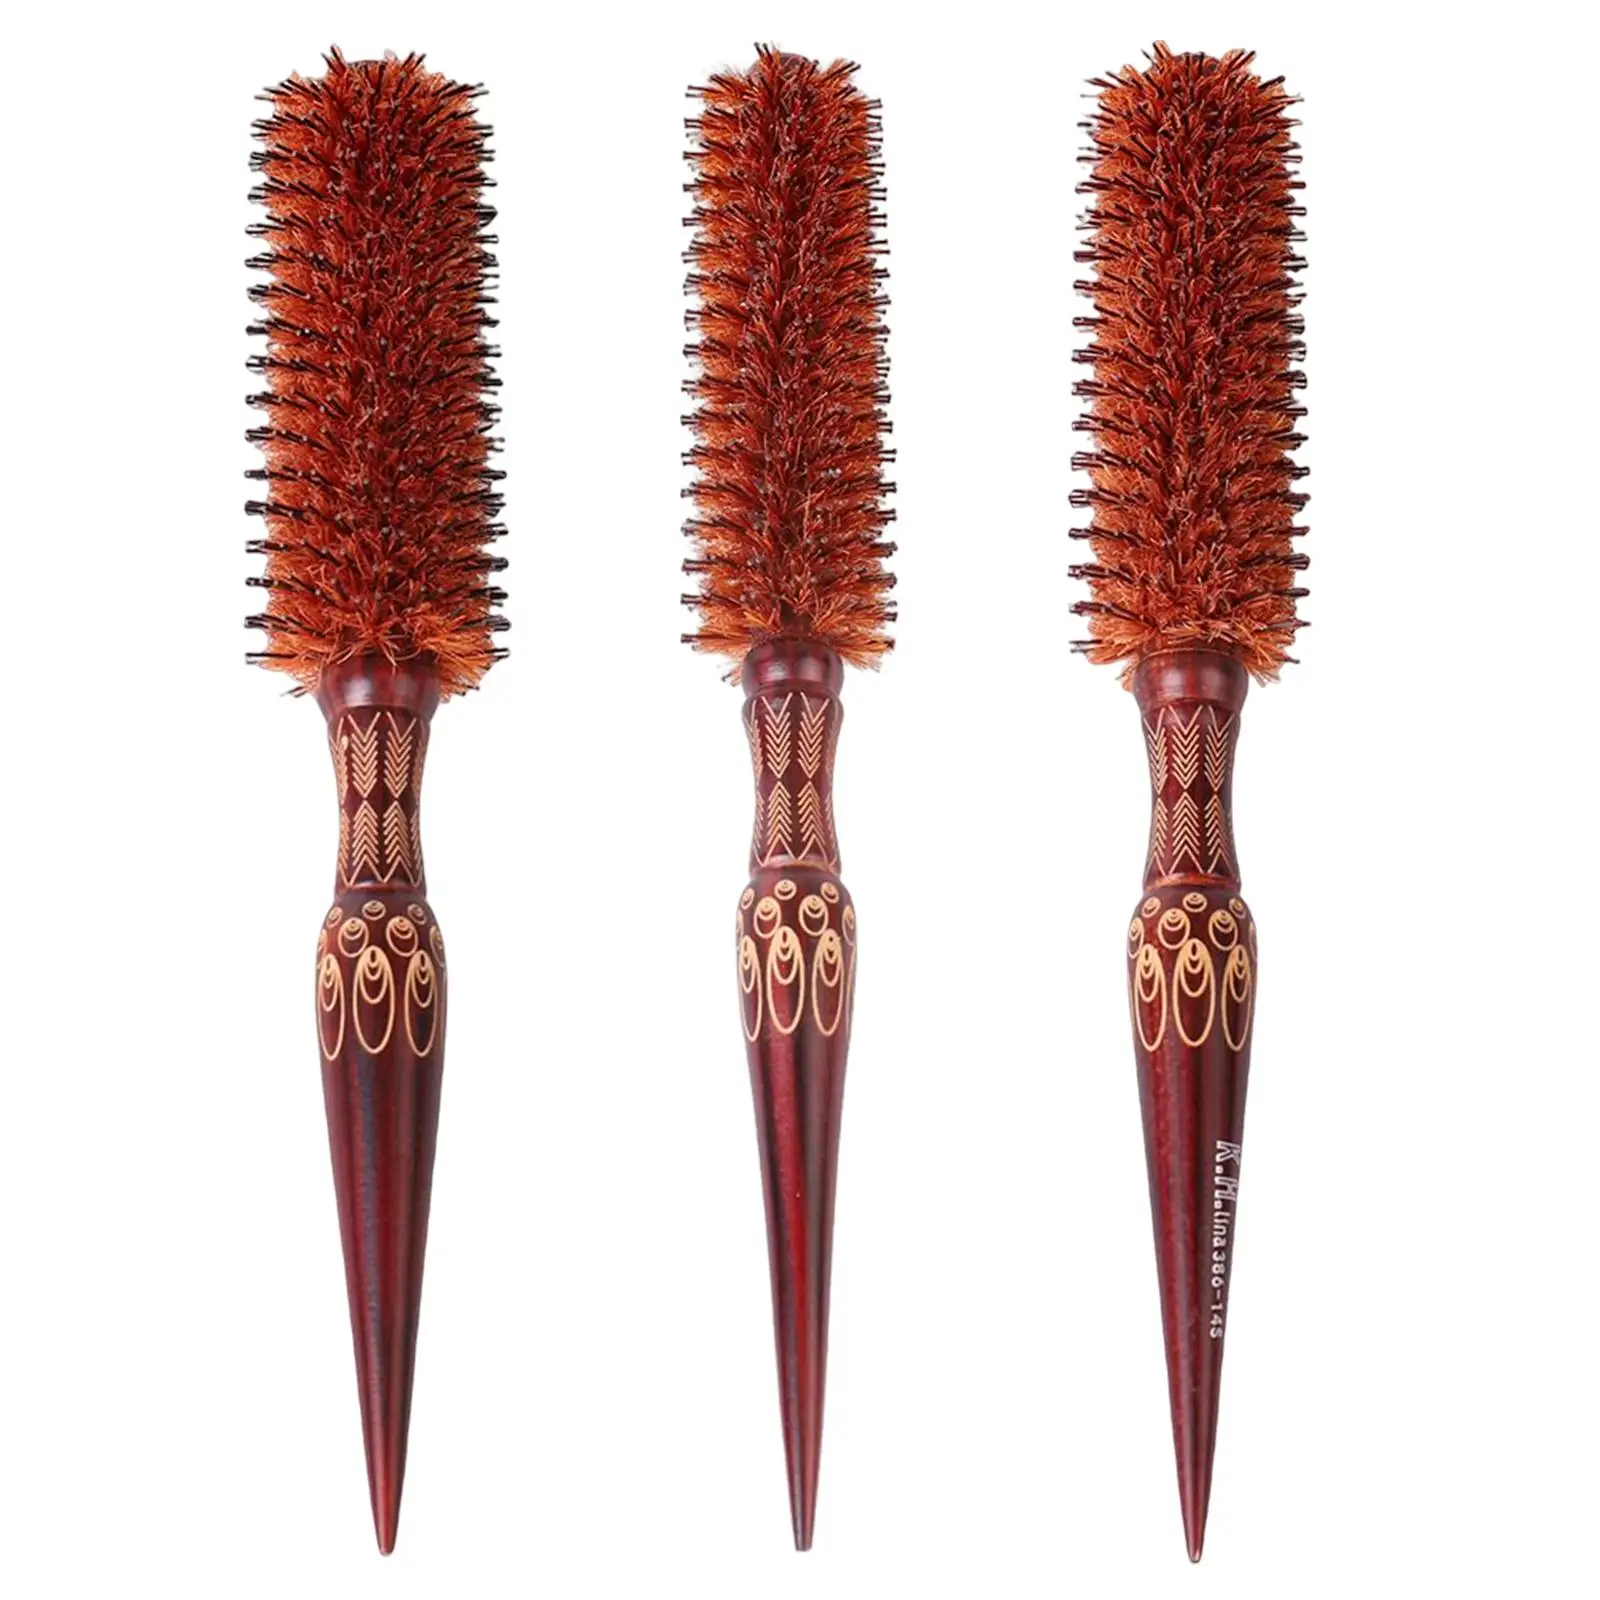 Bristle Round Hair Brush Anti Static Light Weight Styling Tools Hair Curly Comb for Heat Styling Barber Long Hair Salon